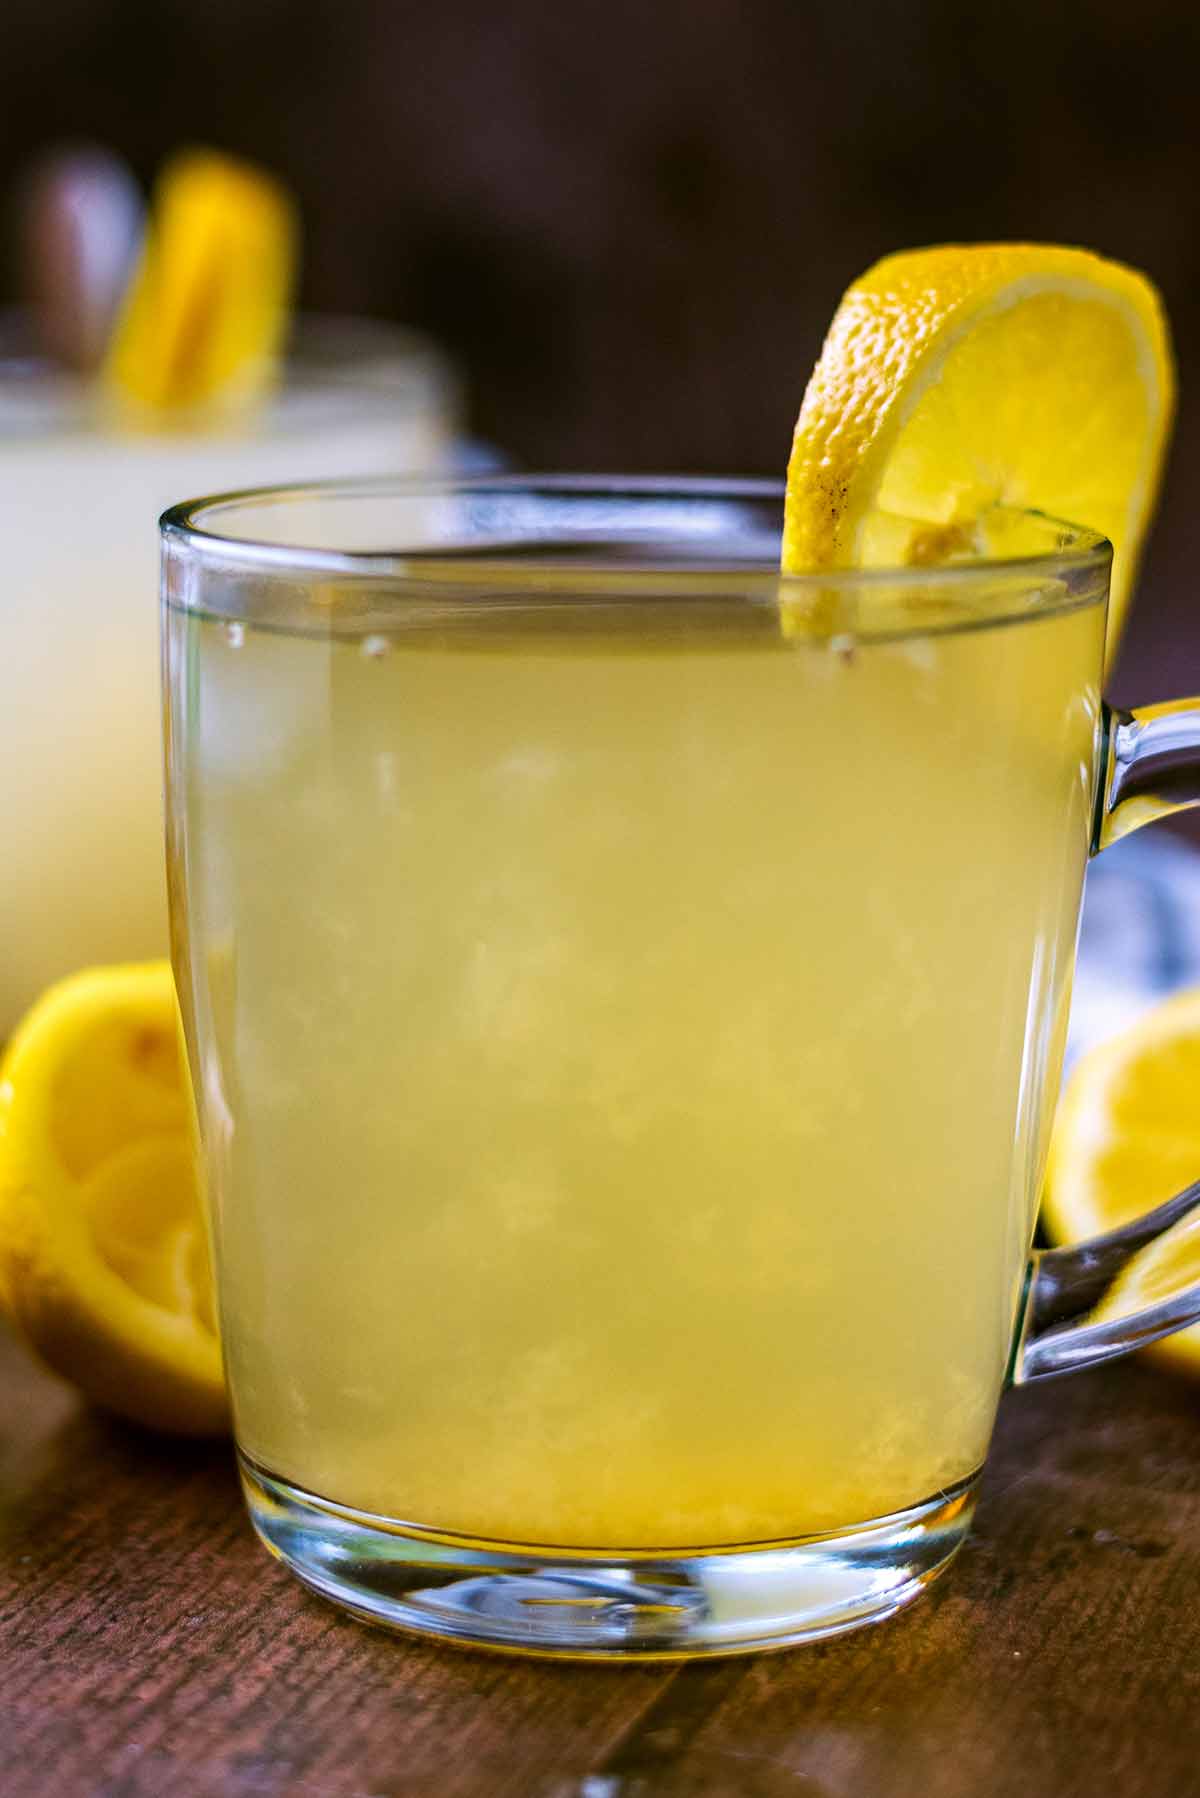 Hot lemon and honey drink in a glass with a lemon slice on top.